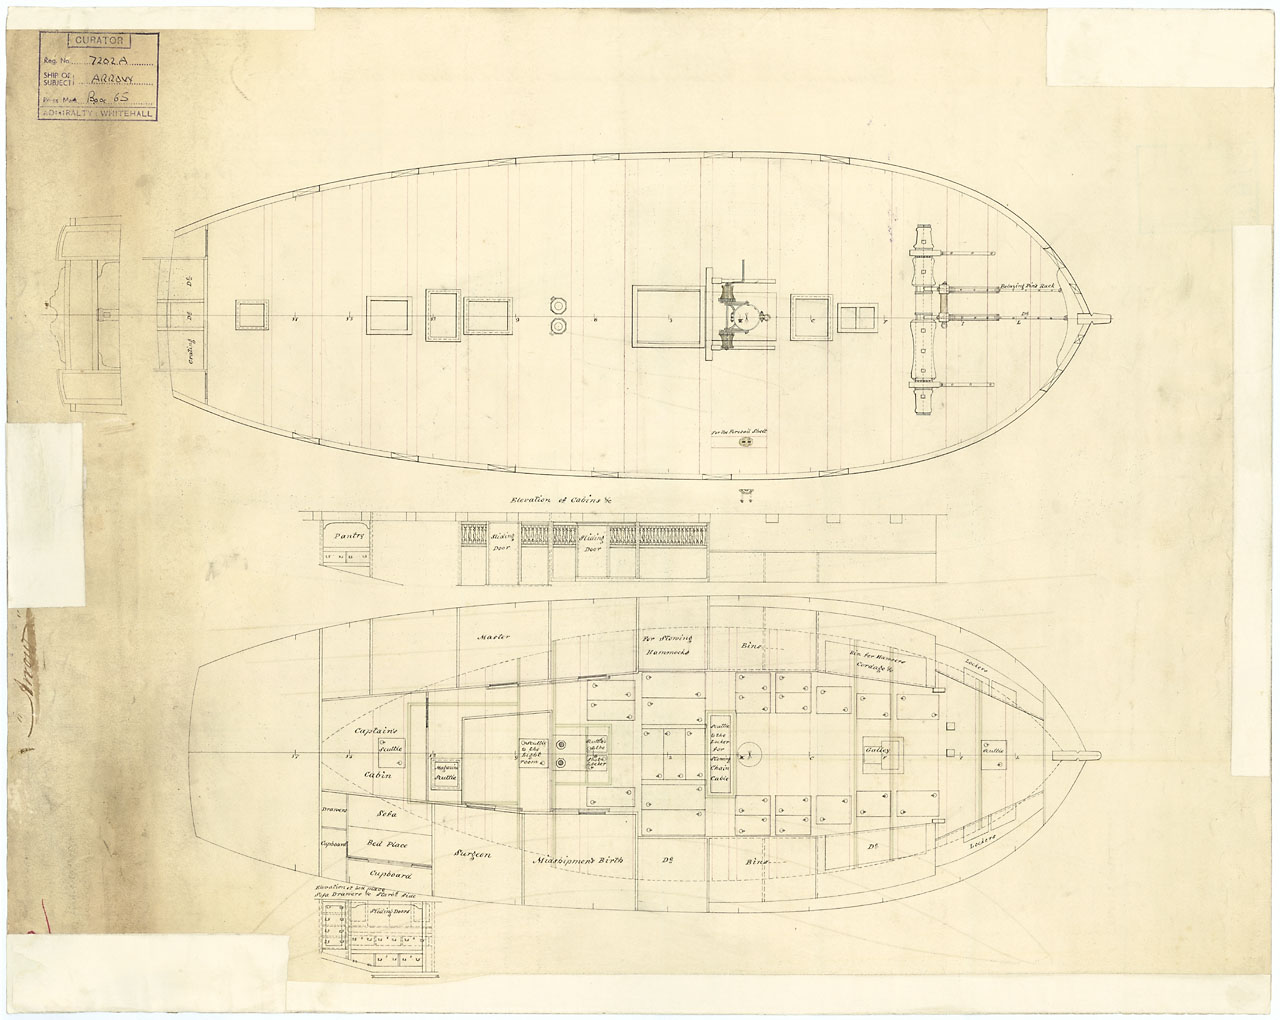 Arrow (1823), a 10-gun single-masted Cutter, as designed and built by Captain Hayes. -2.jpg